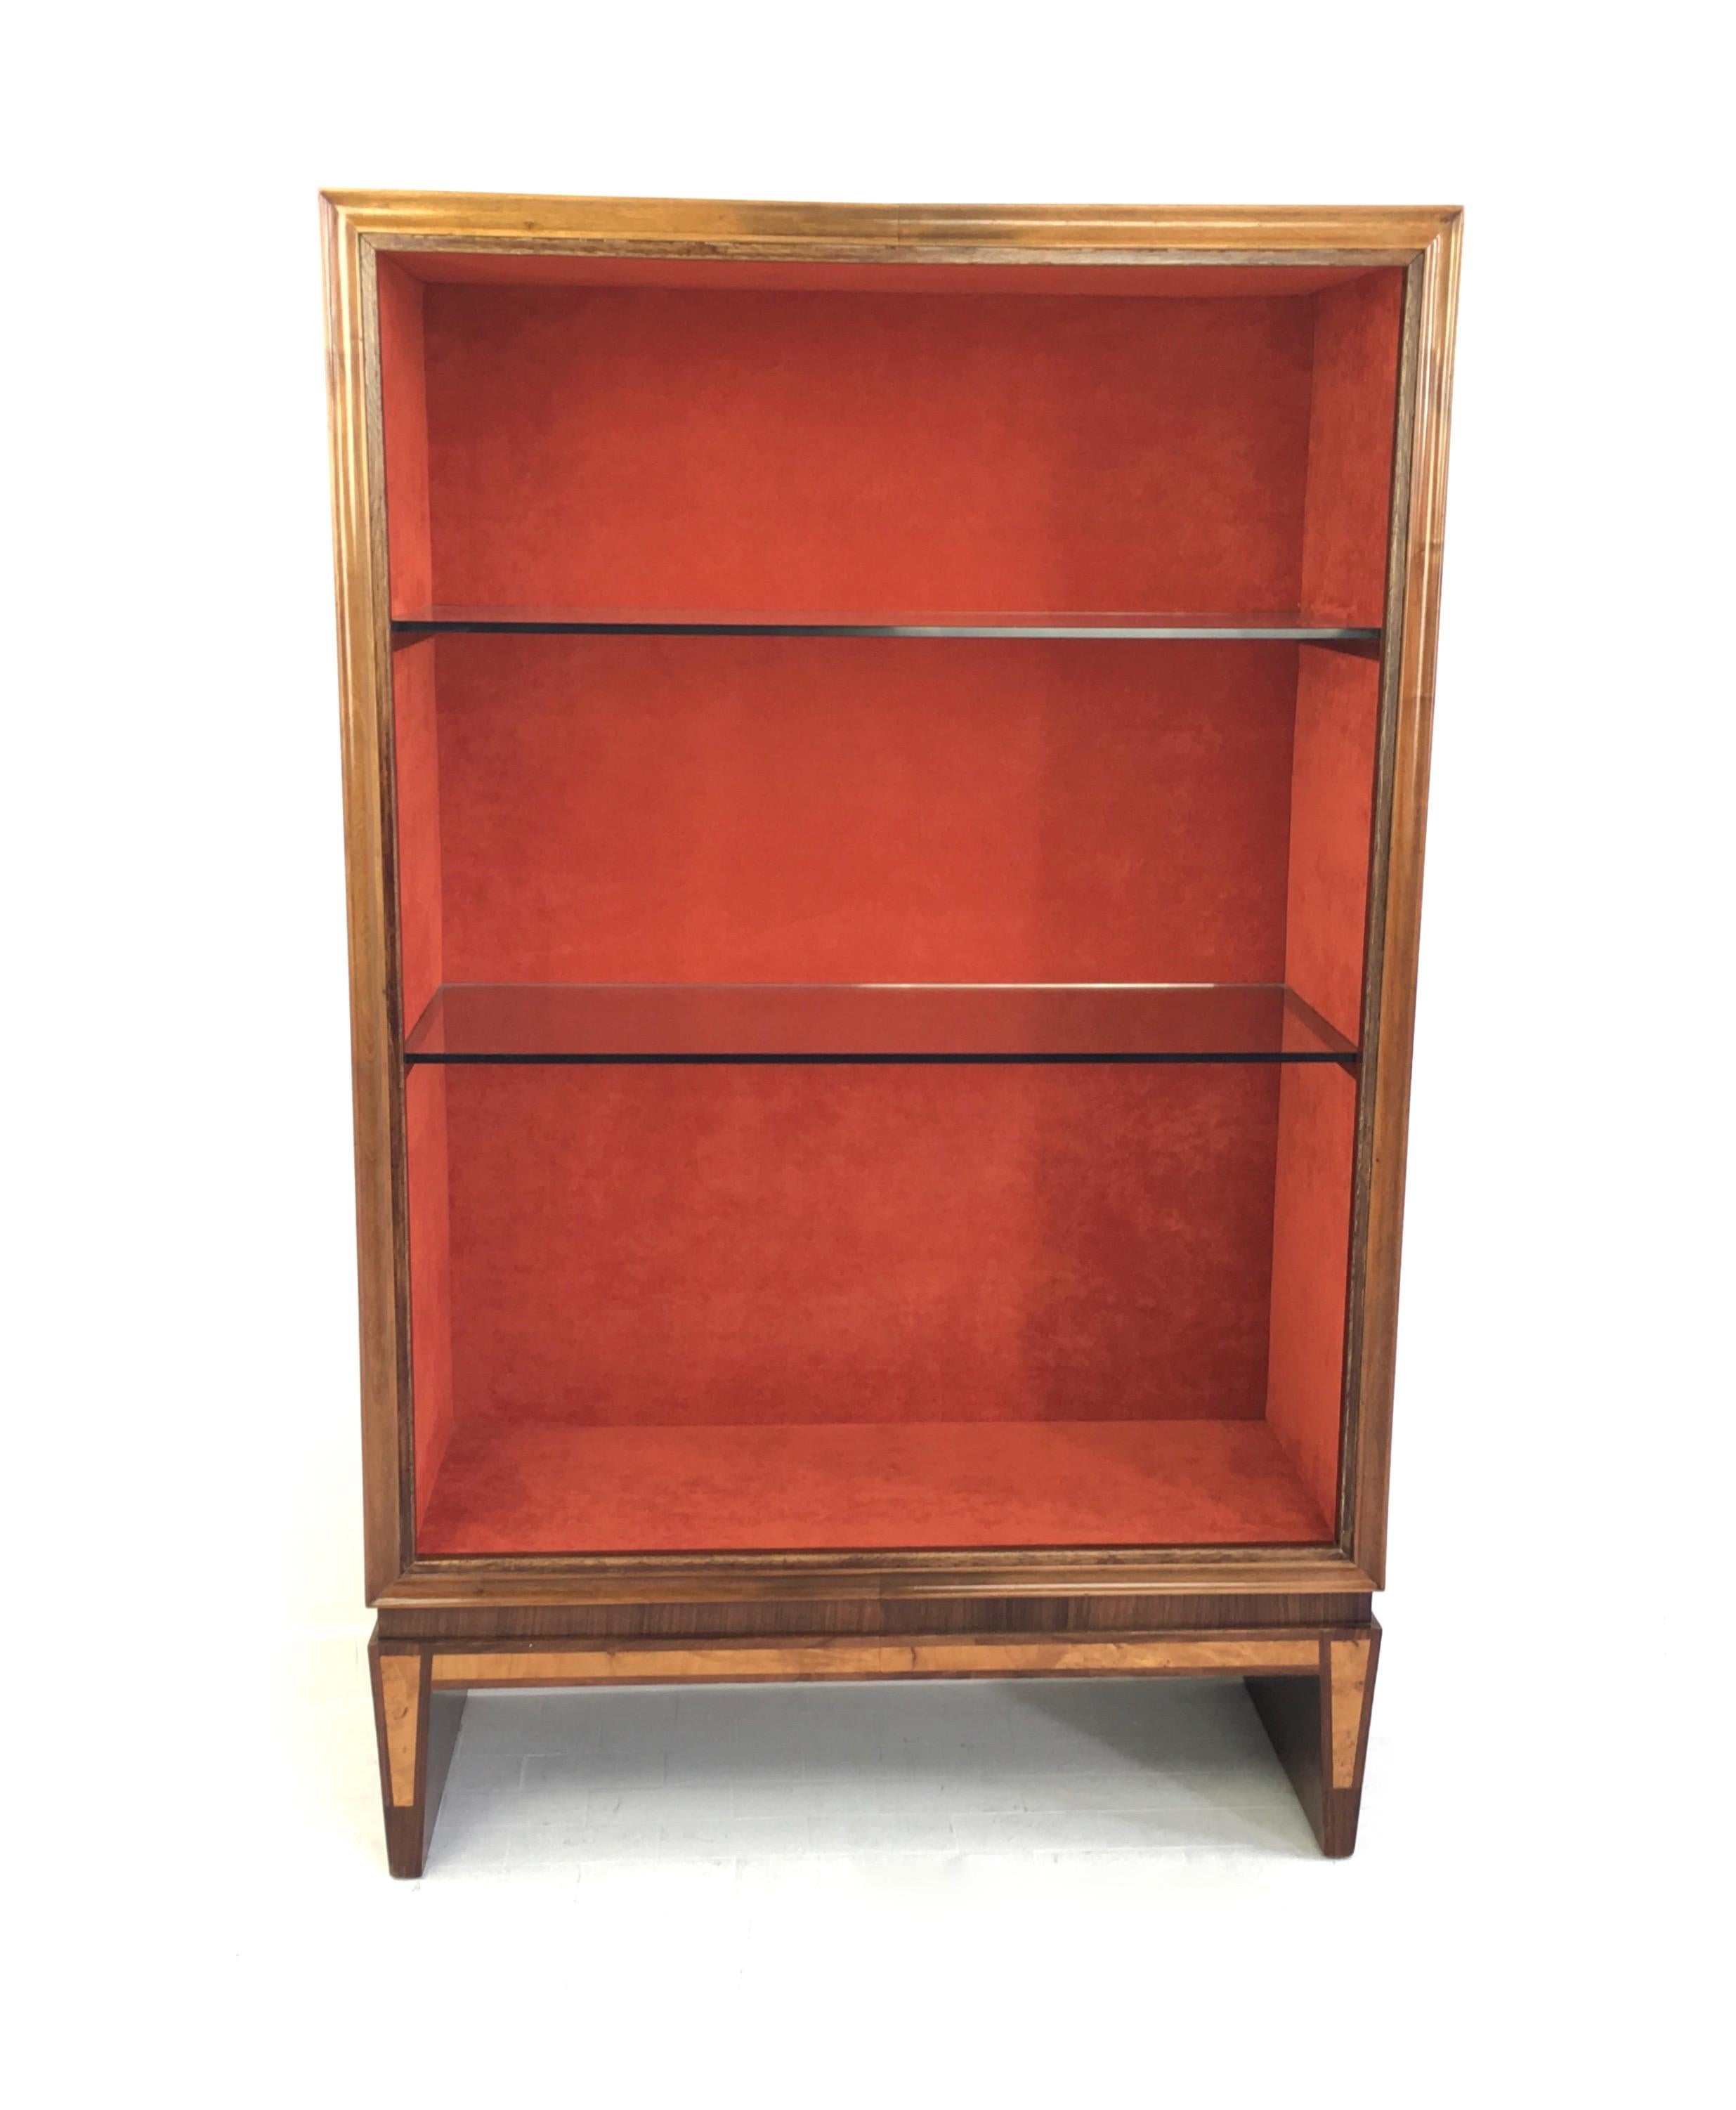 Made in wood, briar-root and maple. 
It features velvet interiors and crystal shelves.
It may show slight traces of use since it's vintage but it has been polished with shellac and can be considered as in perfect original condition and ready to